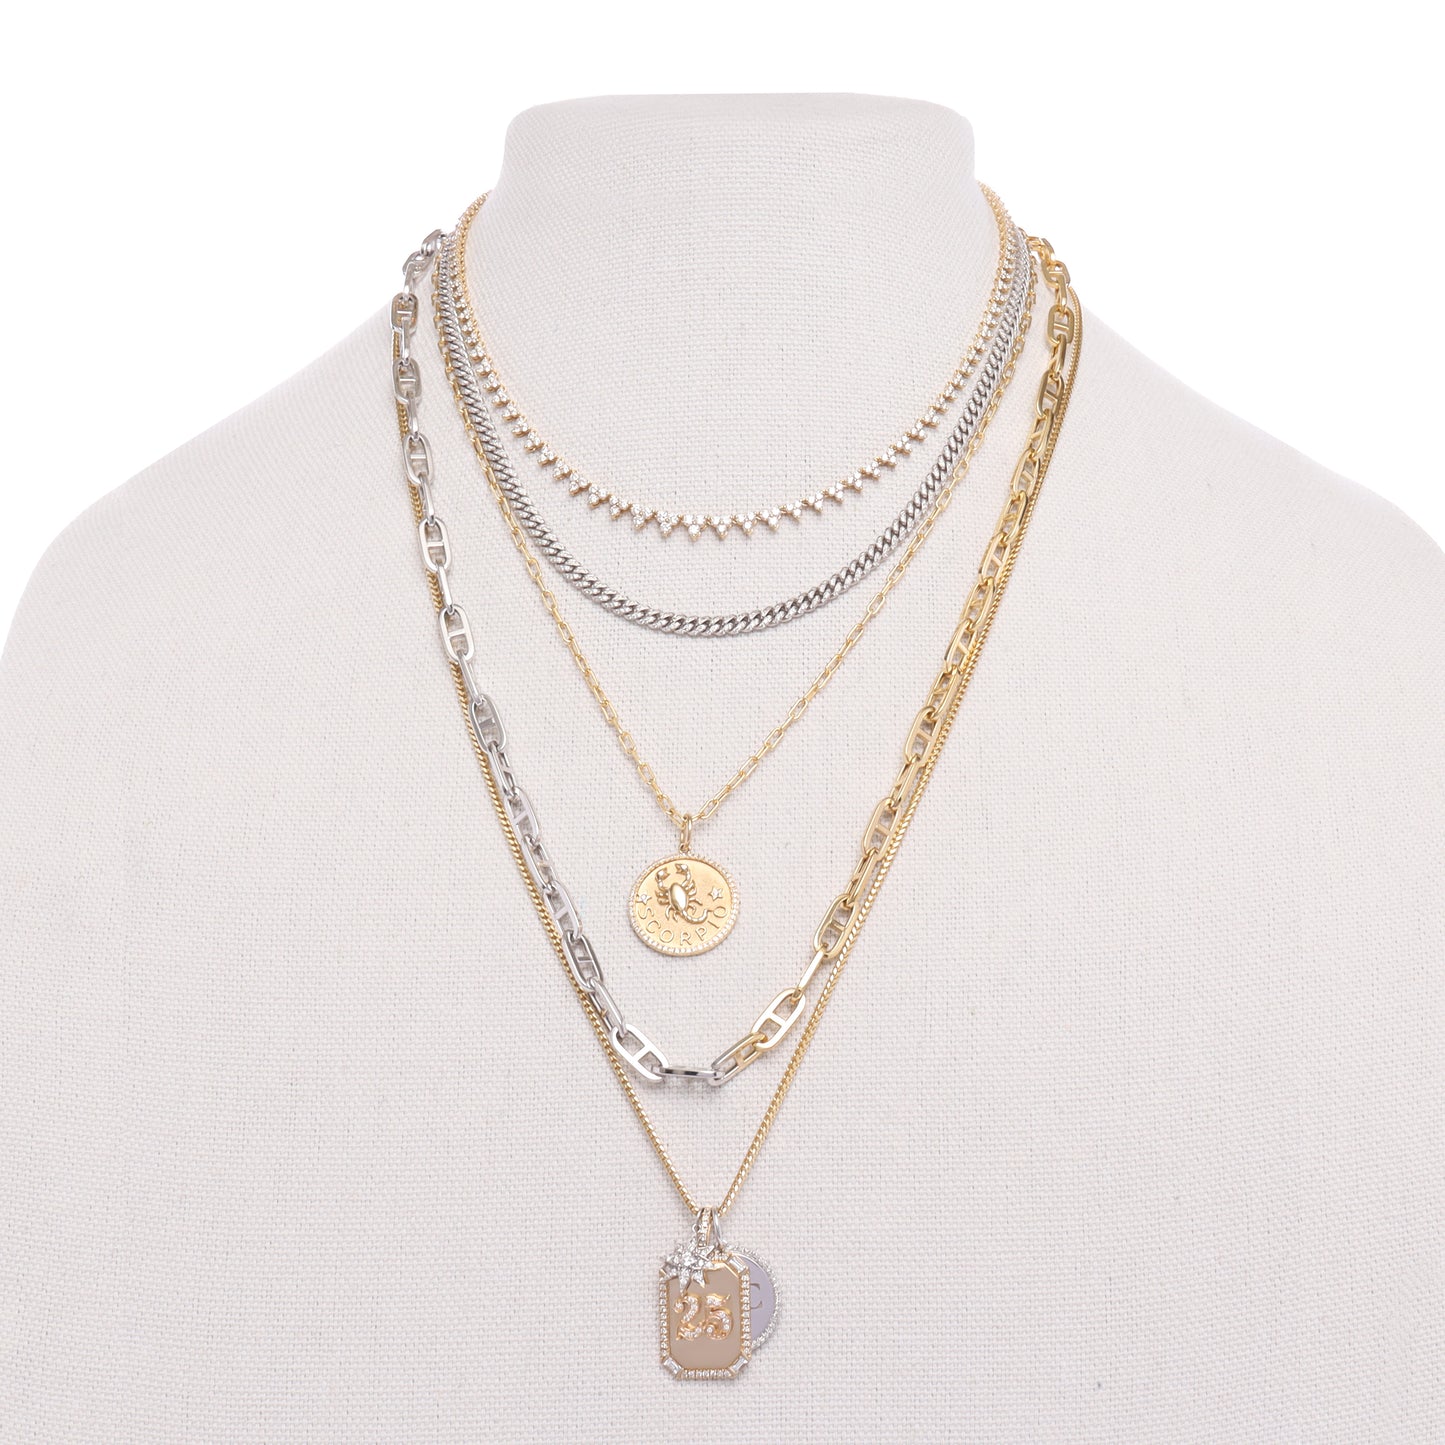 gold chains layered with diamond cuban link necklace and zodiac pendant by the10 jewelry